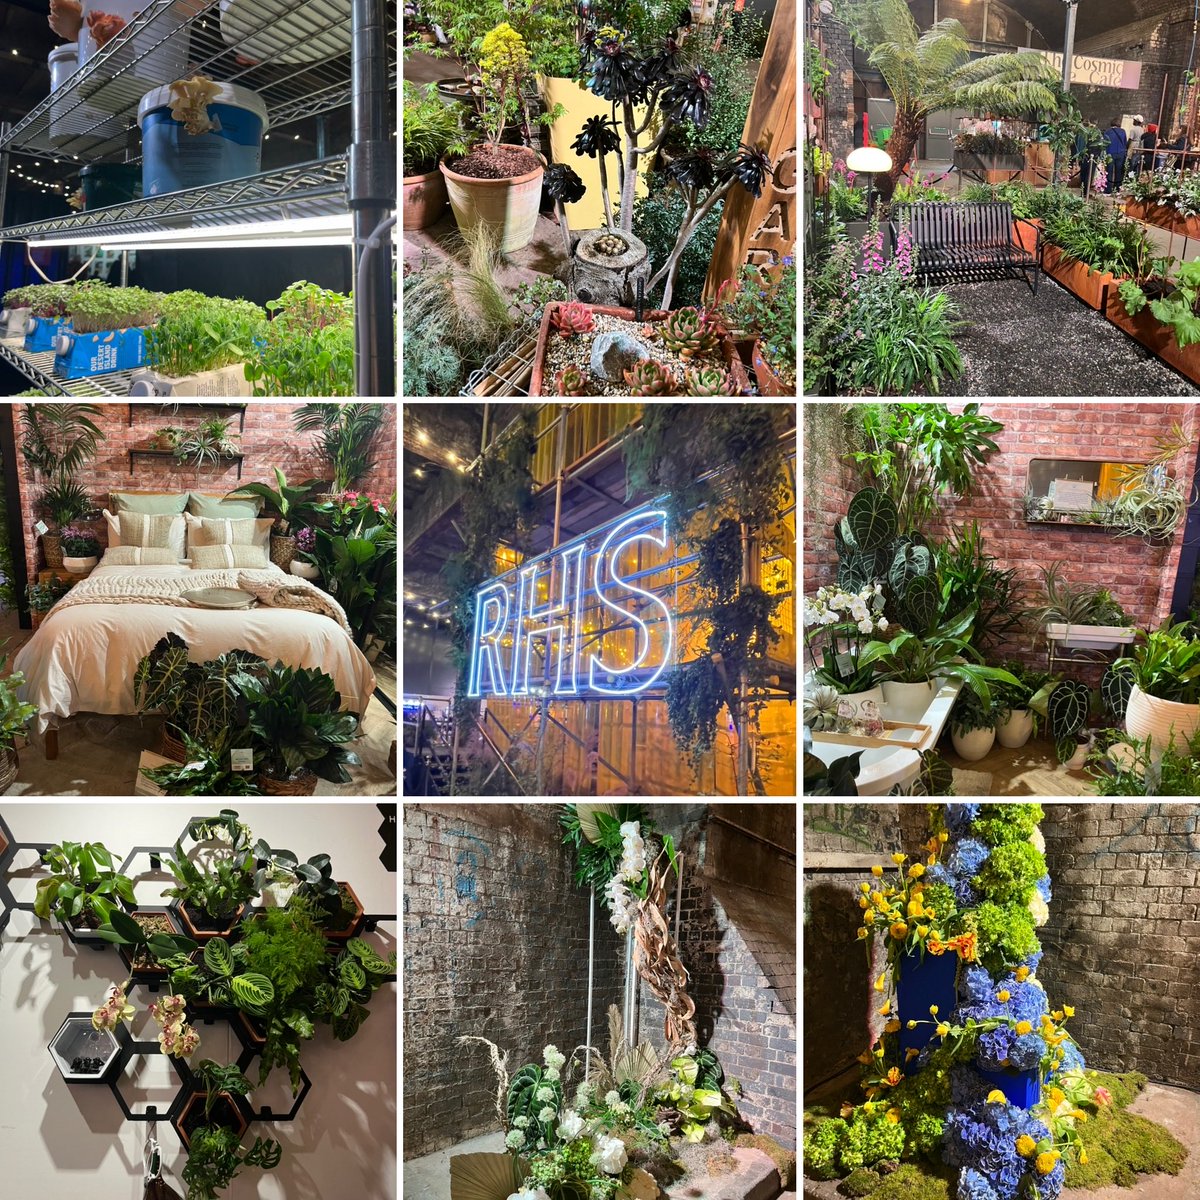 We visited the new ⁦@The_RHS⁩ Urban show today. Some interesting displays and ideas for small gardens and balconies and lots of advice on how not to kill our houseplants! ⁦@nwibofficial1⁩